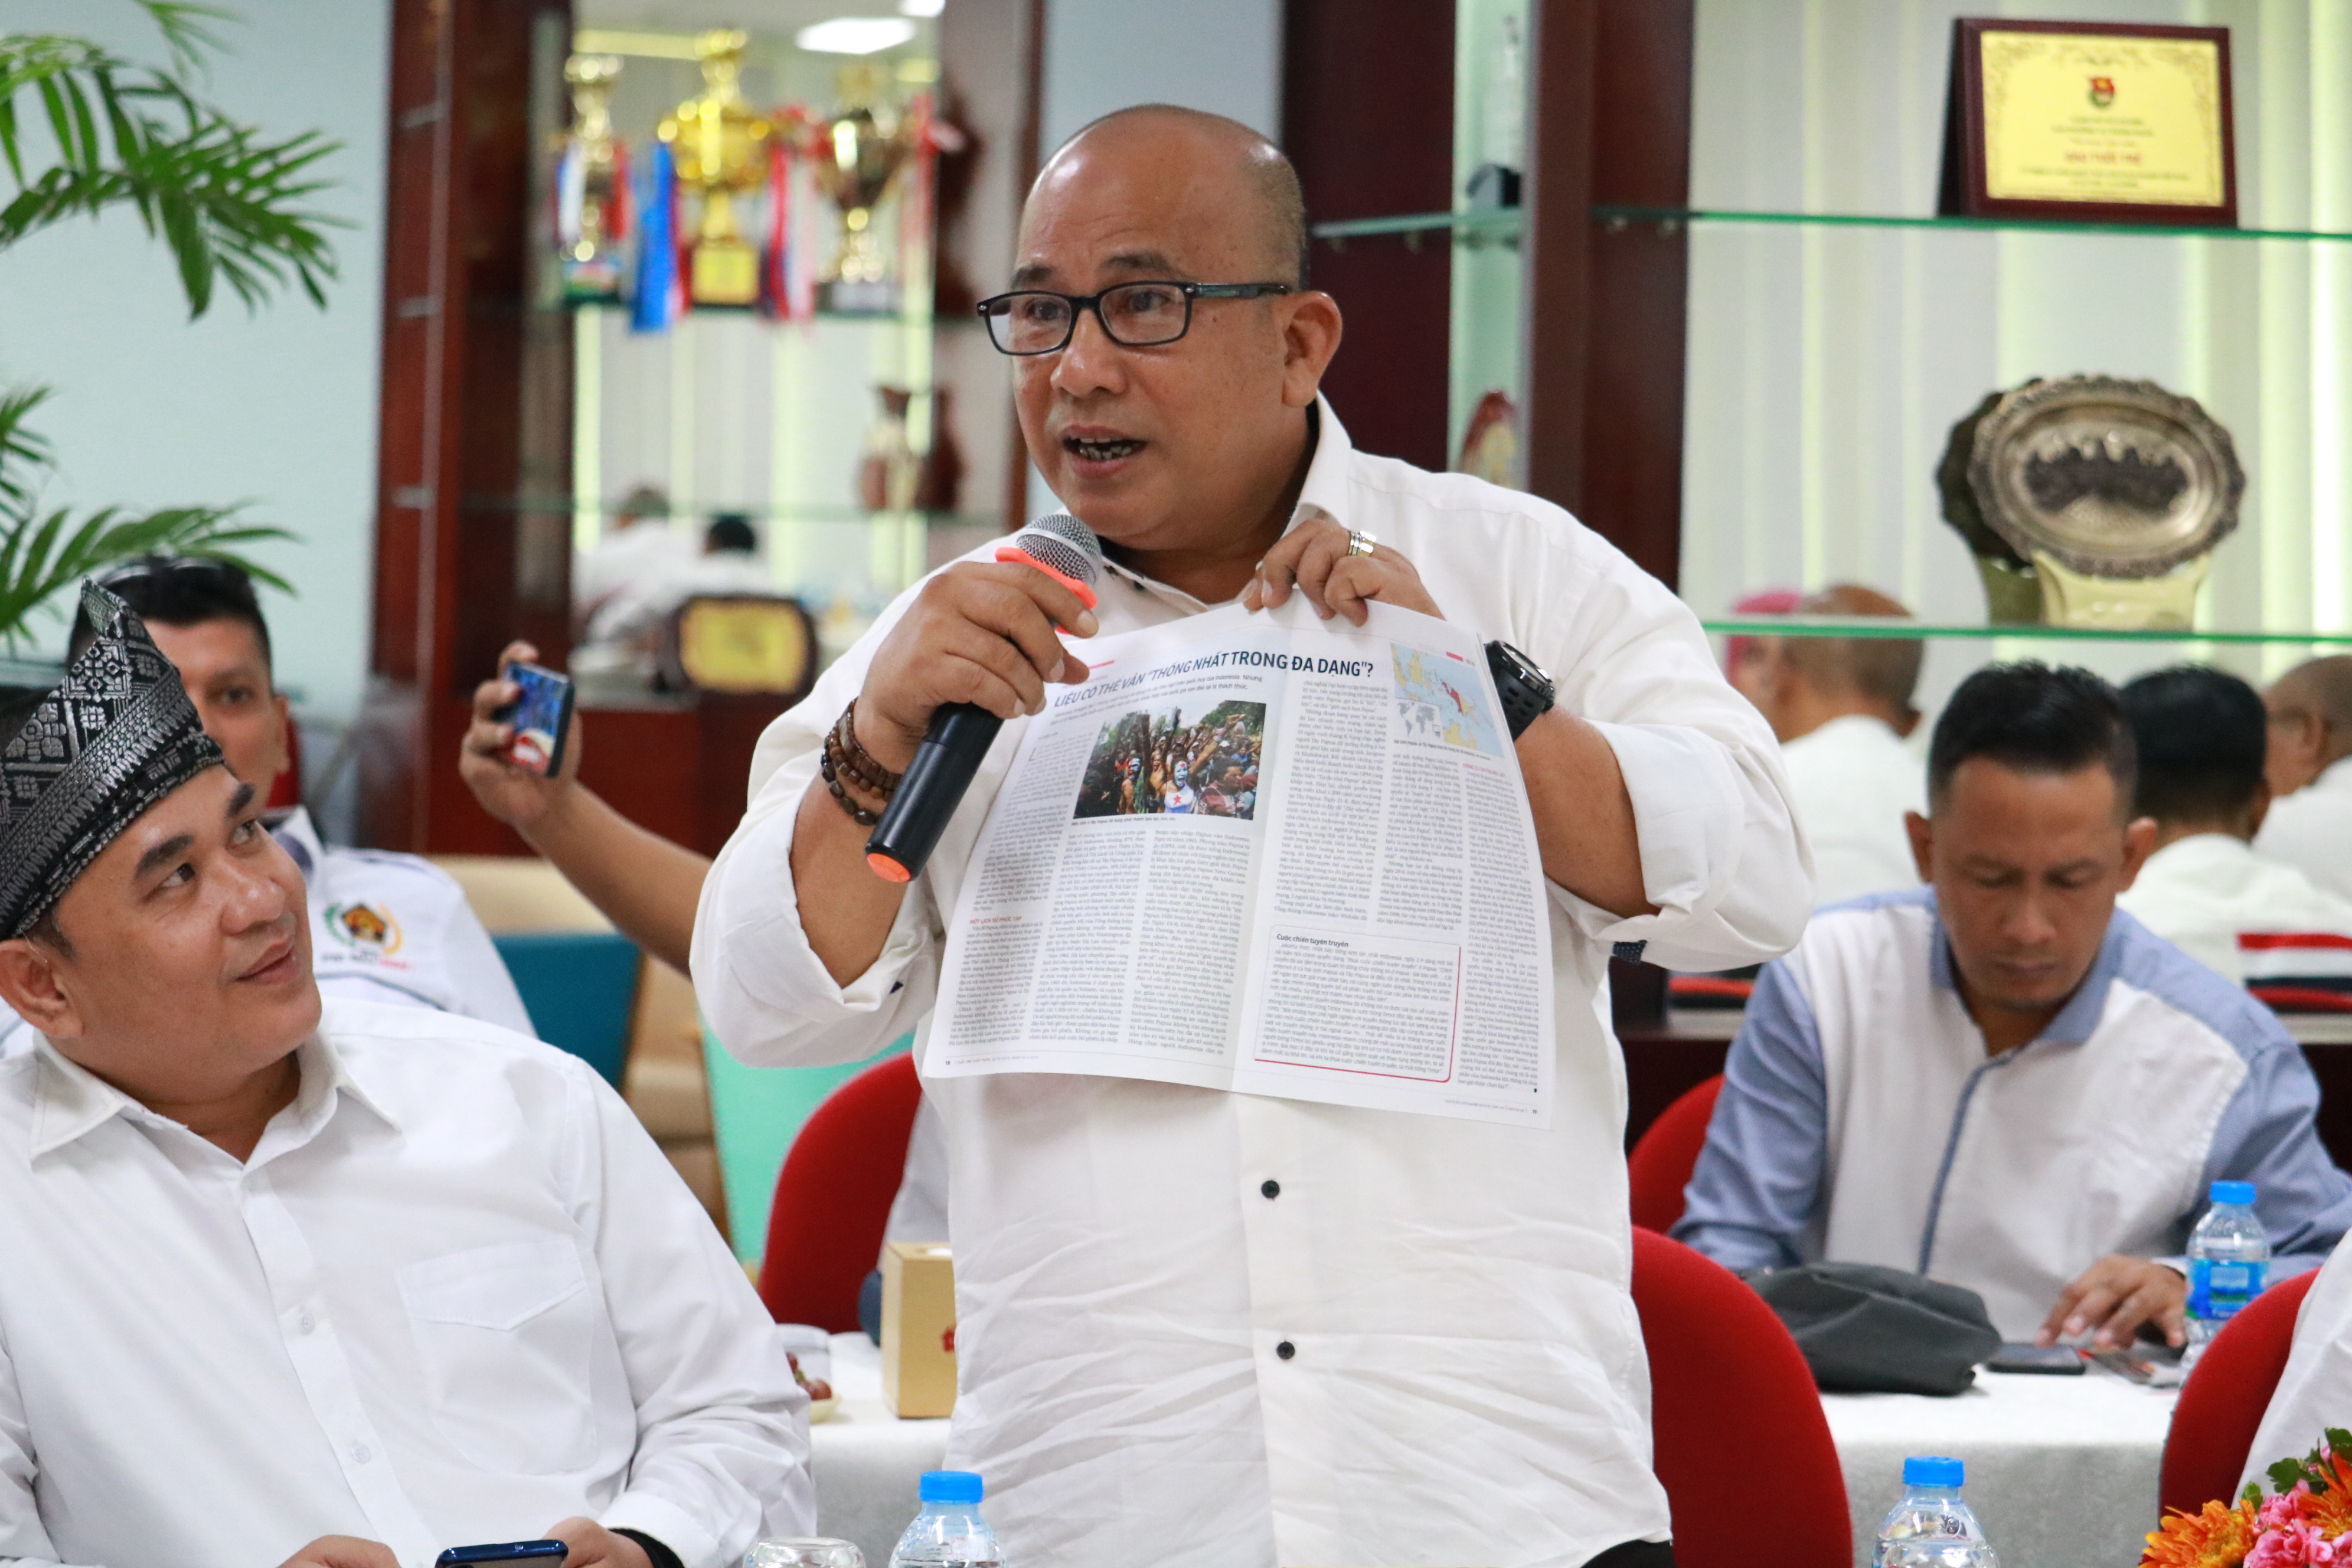 An Indonesian journalist asks a question about a Tuoi Tre article during a visit to the newspaper's main office in Ho Chi Minh City, Vietnam, September 19, 2019. Photo: Ngoc Phuong / Tuoi Tre